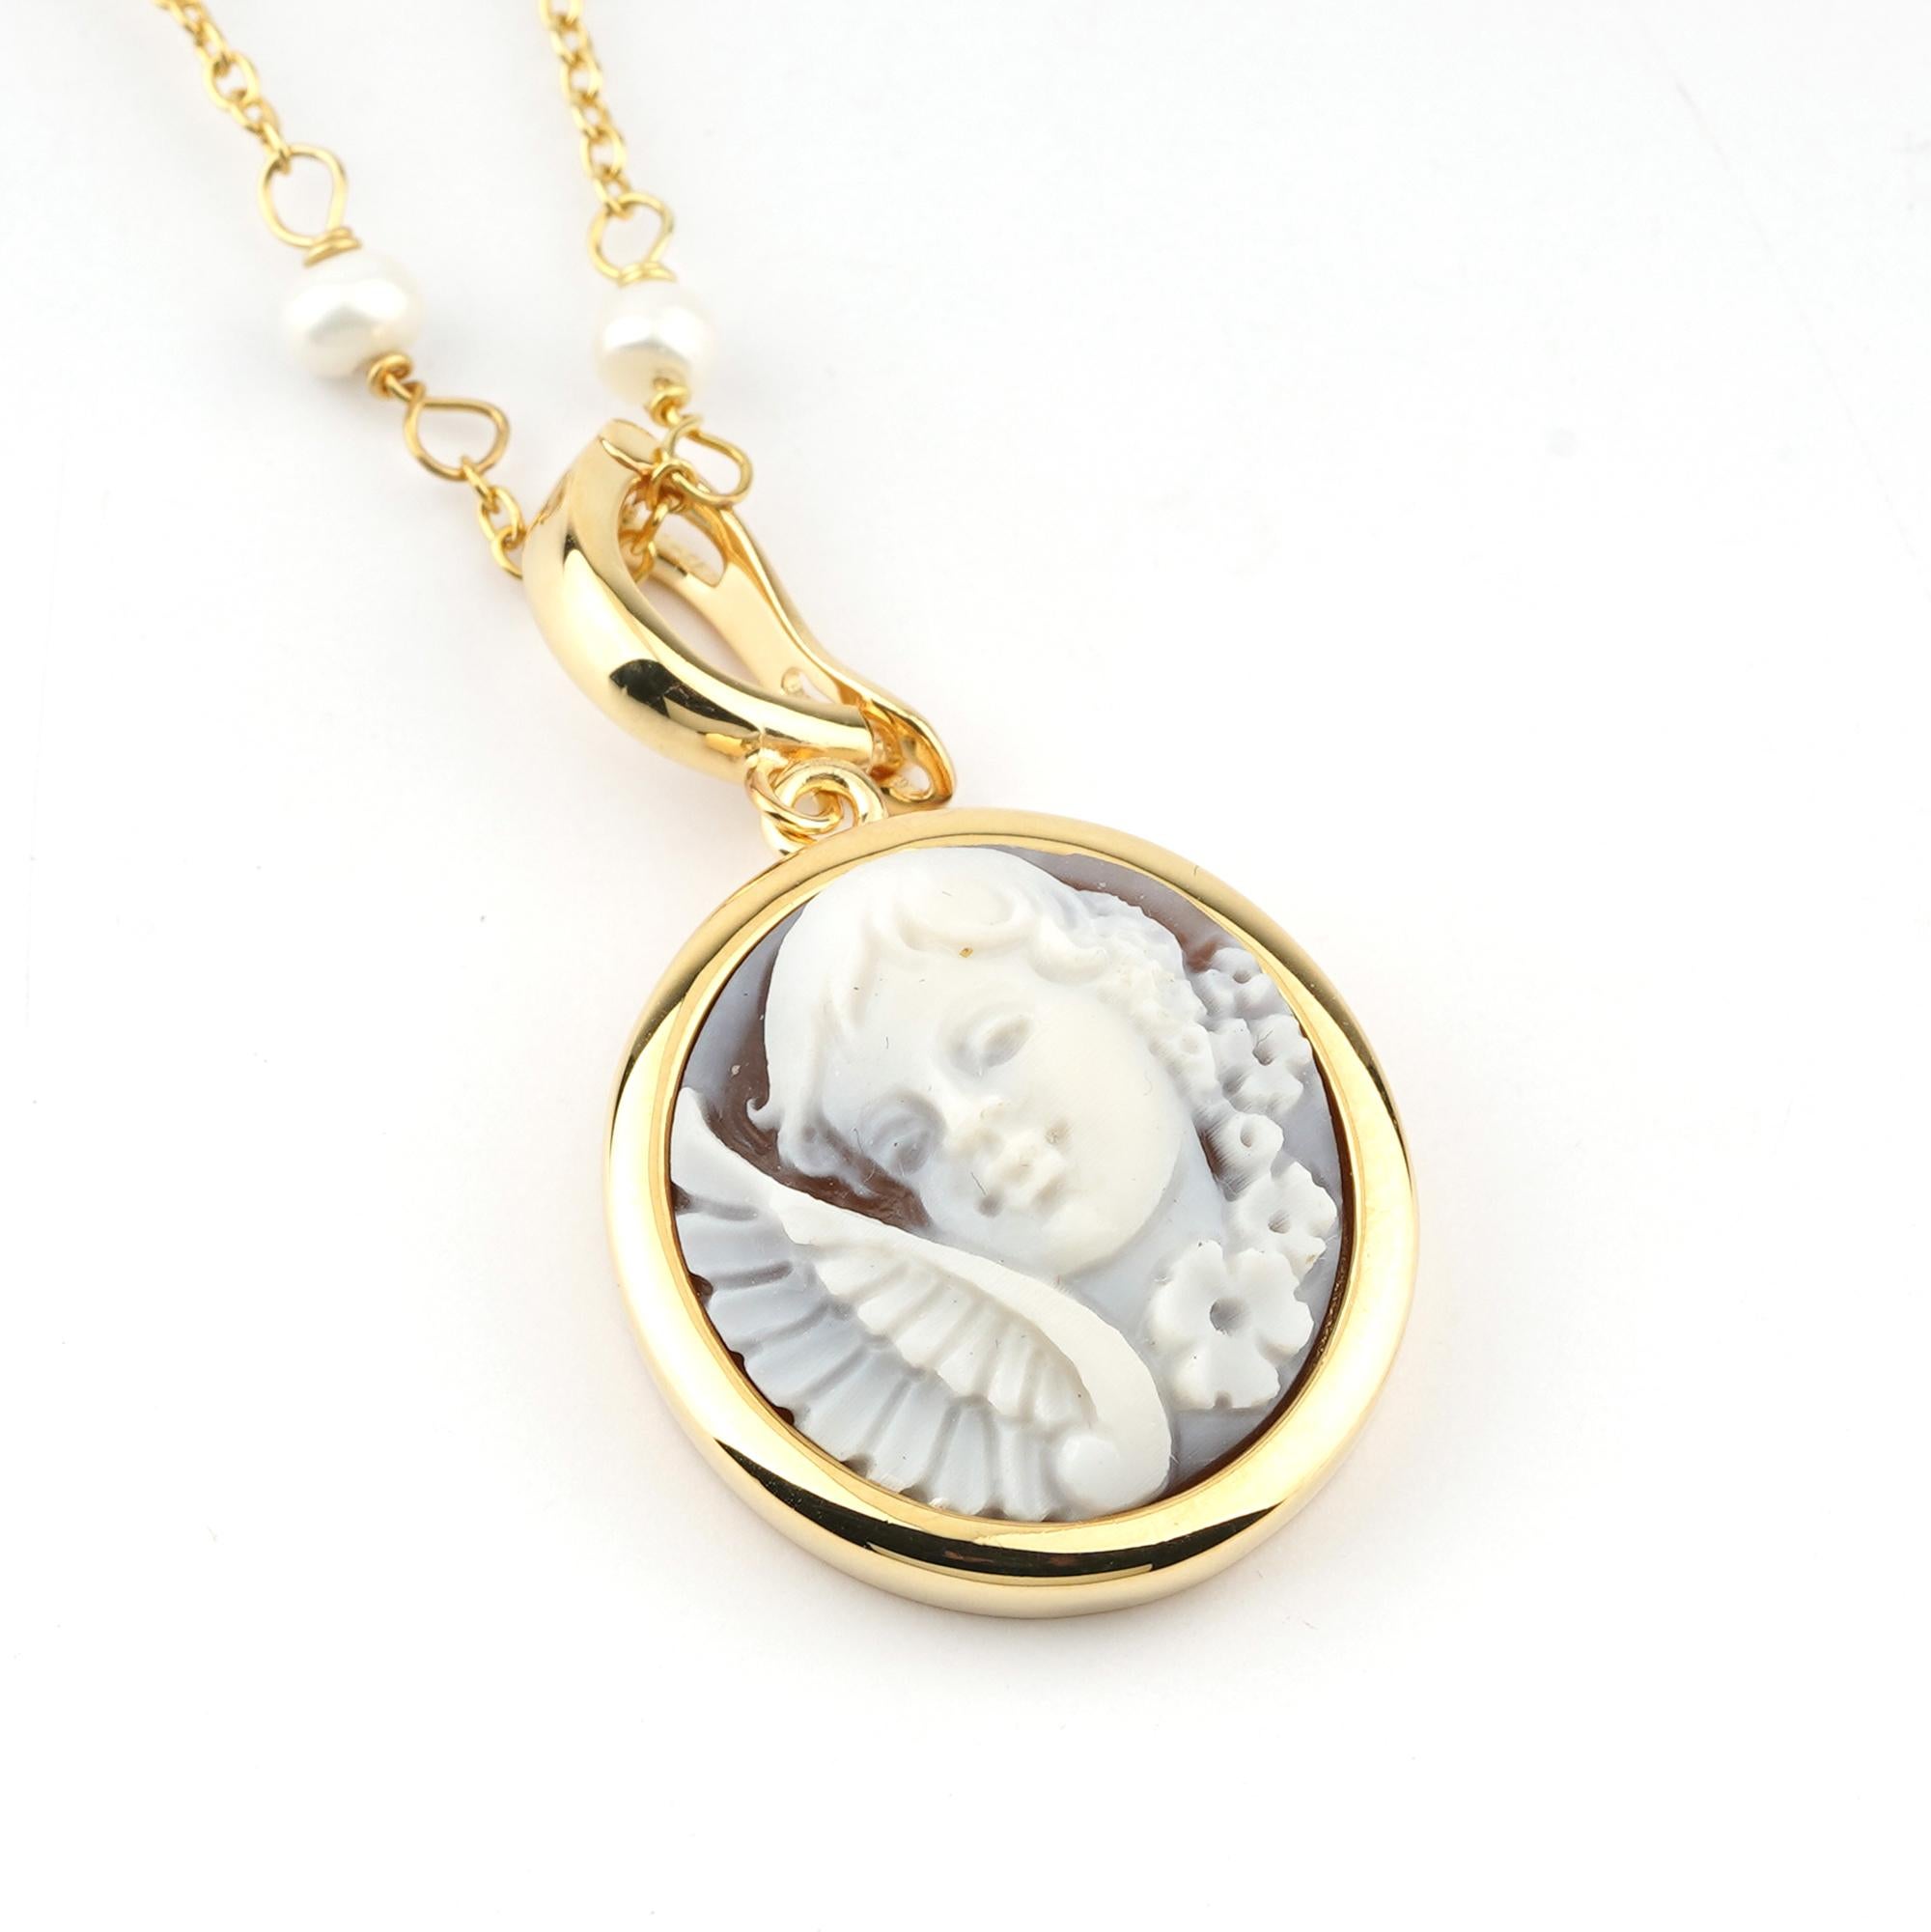 18 carat Gold Plated 925 Sterling Silver with 20mm Sea Shell Cameos Pendant Necklace. Fully handcarved Portrait on a sea shell cameo set in a 18kt Gold plated silver Pendant Necklace with freshwater pearls. Carvings are performed by our master